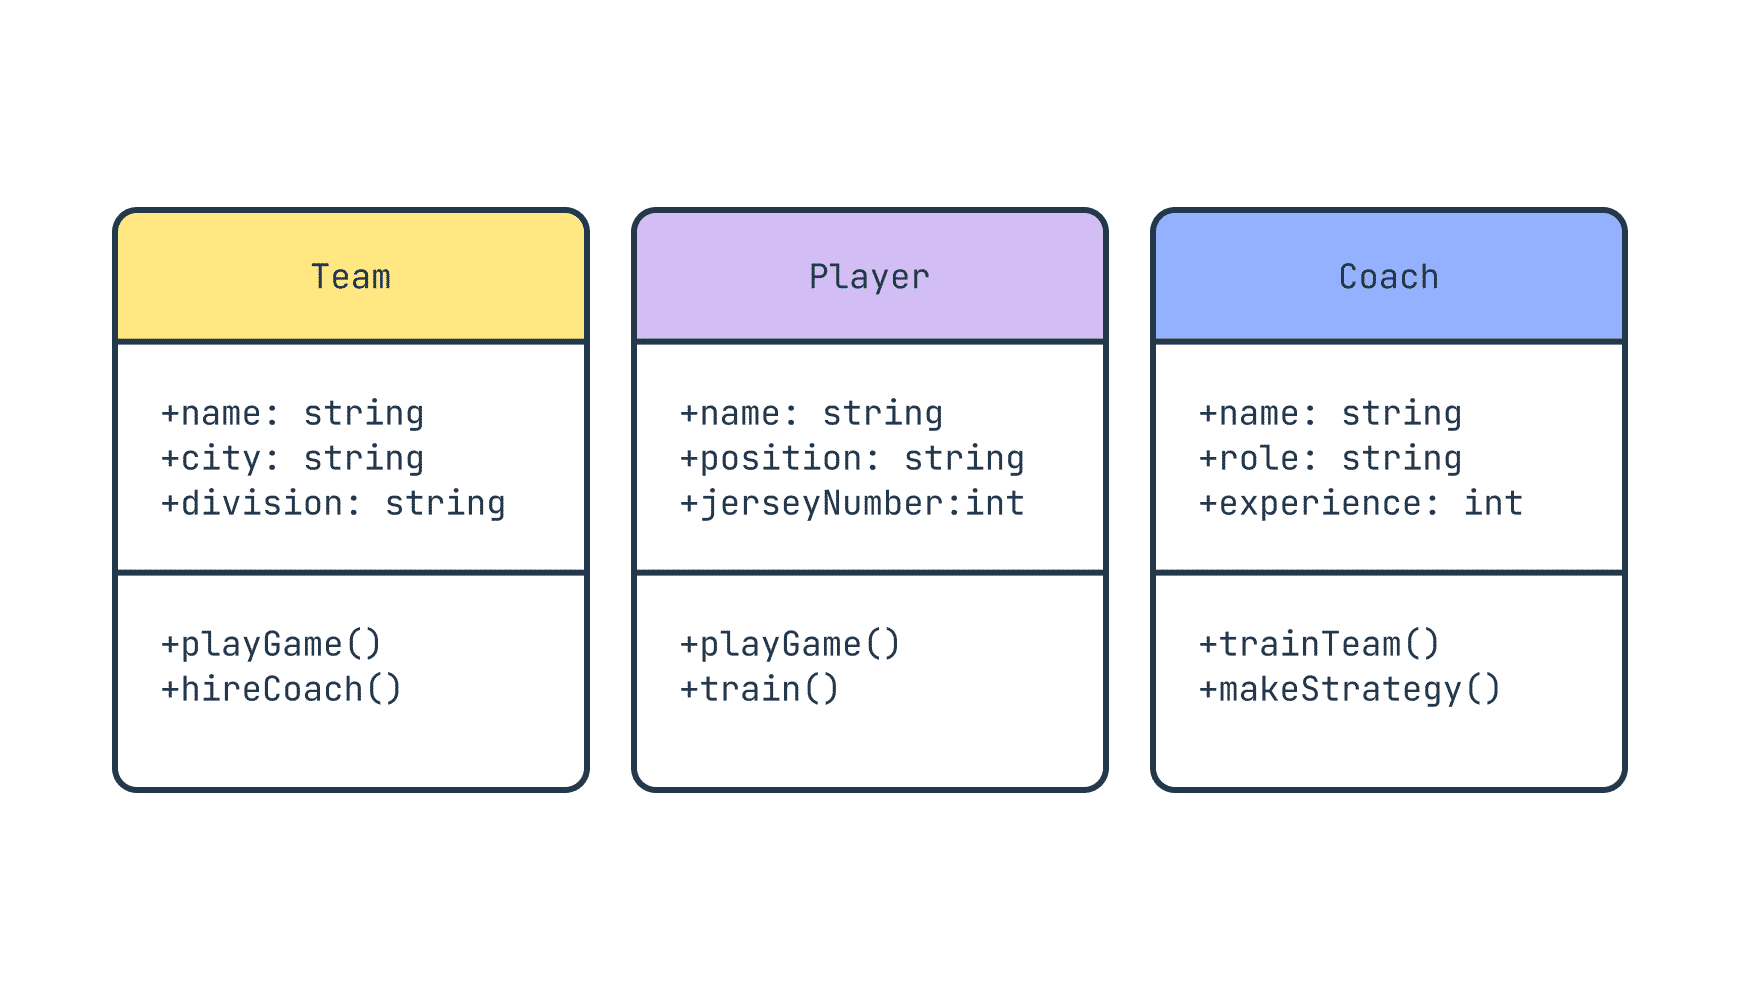 3 rectangles used to depict classes in a UML diagram, with classes, attributes and methods filled in